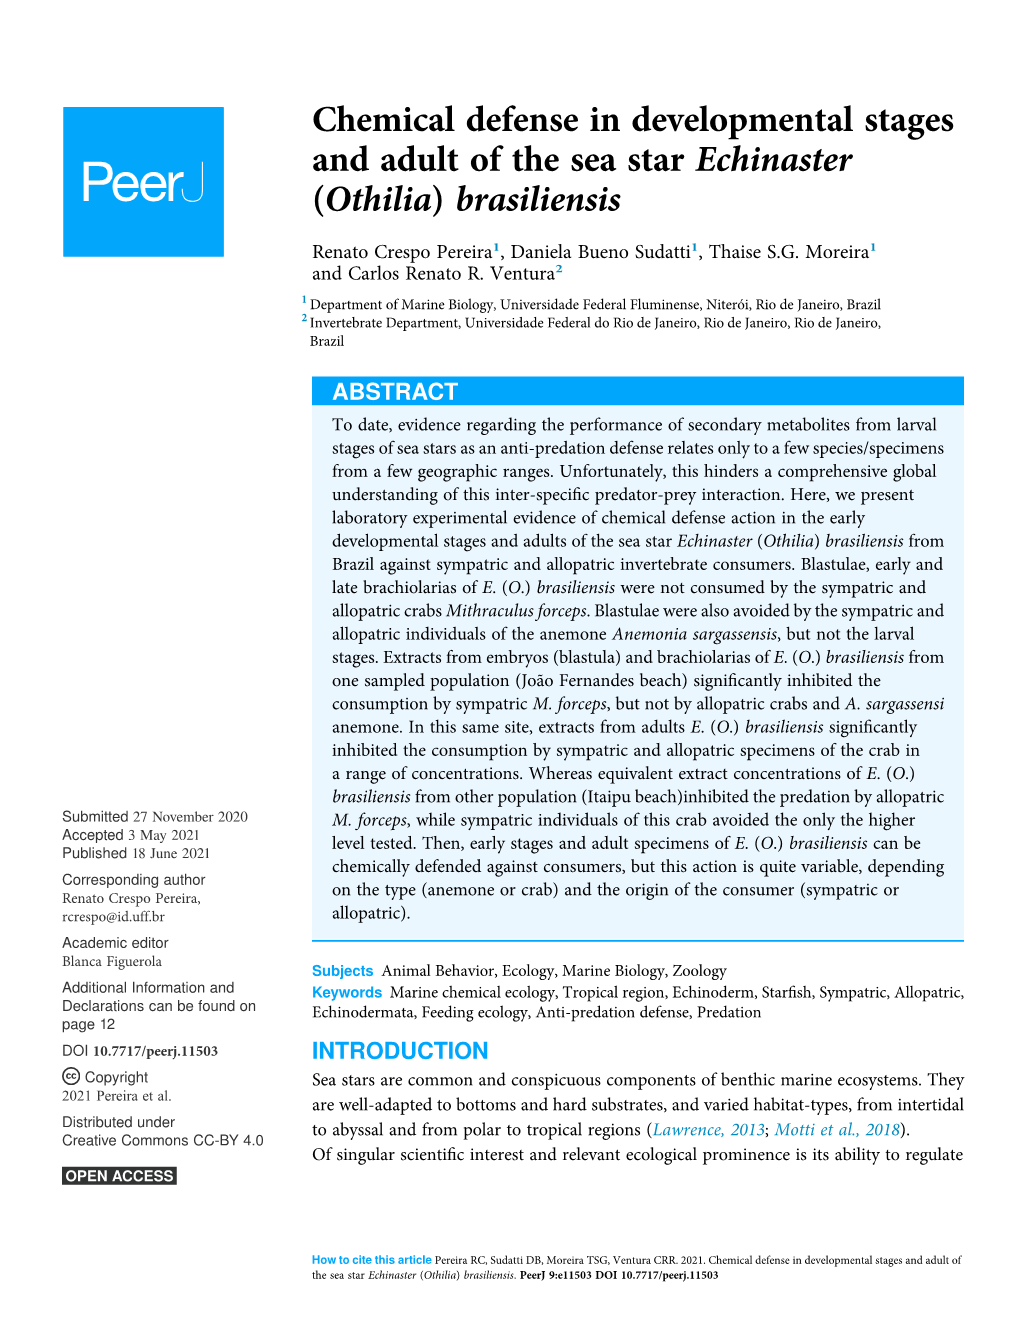 Chemical Defense in Developmental Stages and Adult of the Sea Star Echinaster (Othilia) Brasiliensis